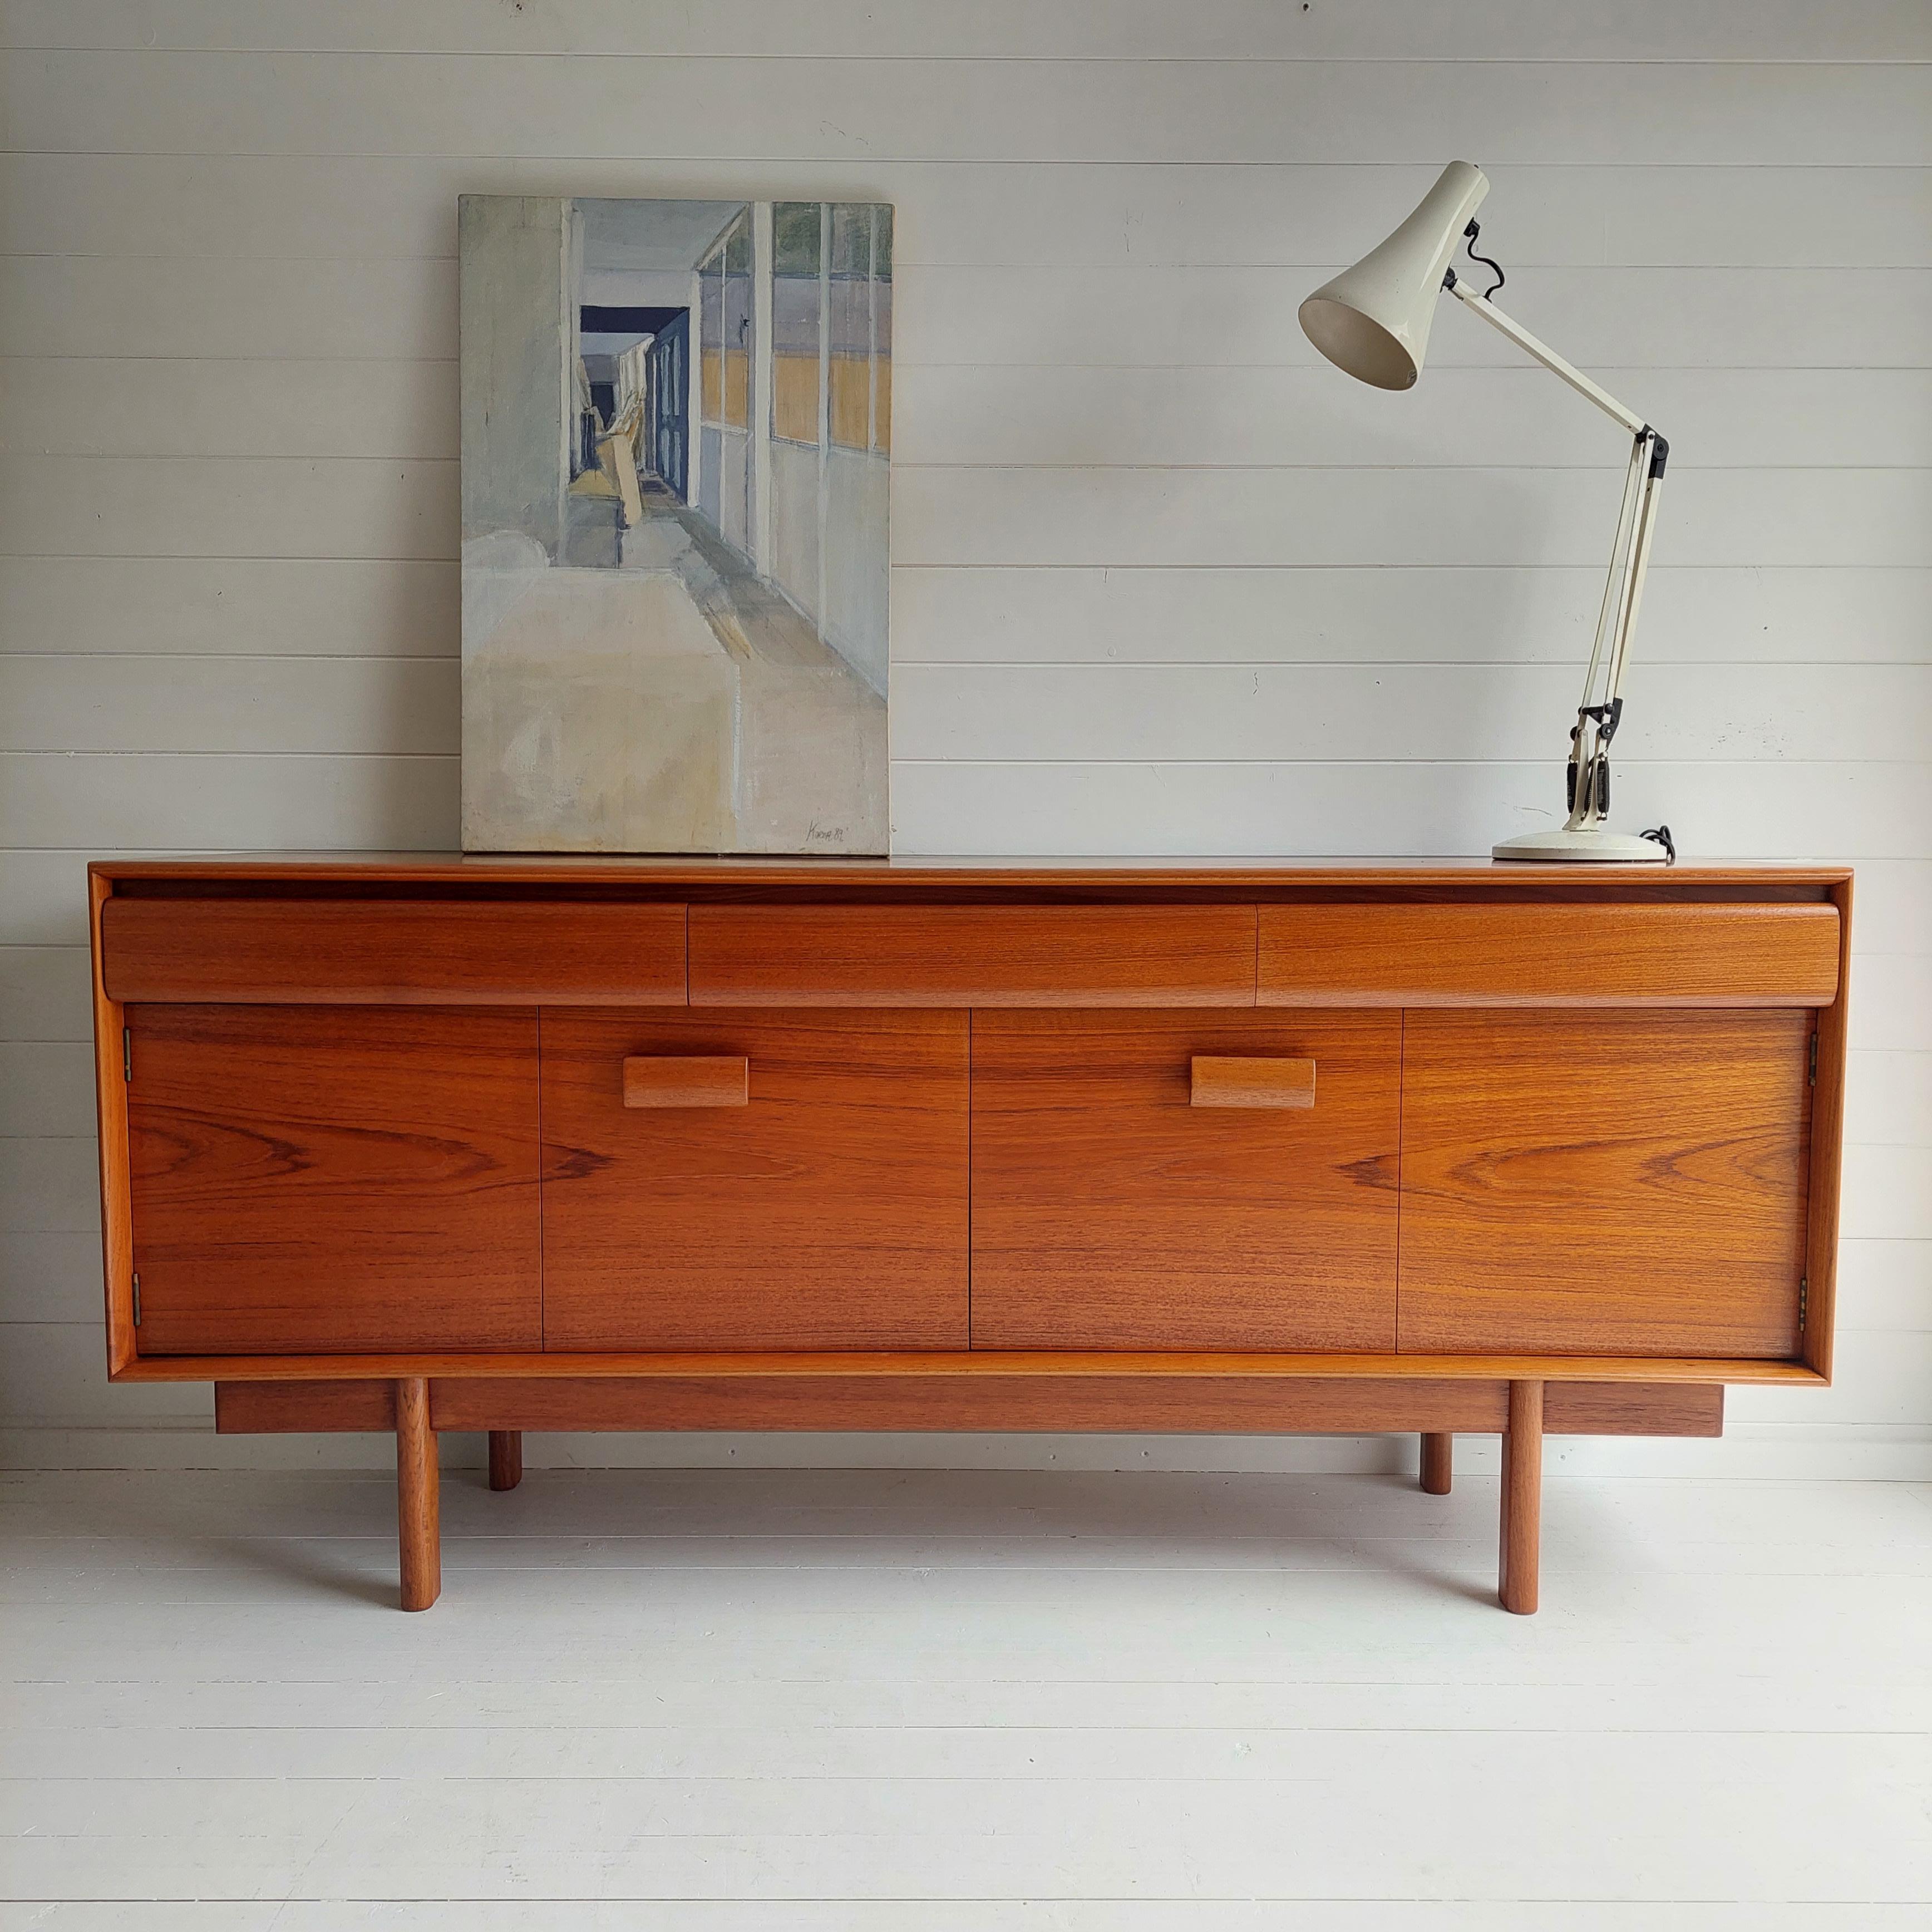 ‘Winchester’ teak sideboard by Philip Hussey for White & Newton of Portsmouth c.1965
This design features a pair of concertina doors opening to reveal a spacious interior
The piece has a spacious full width cupboard fitted with a full-width